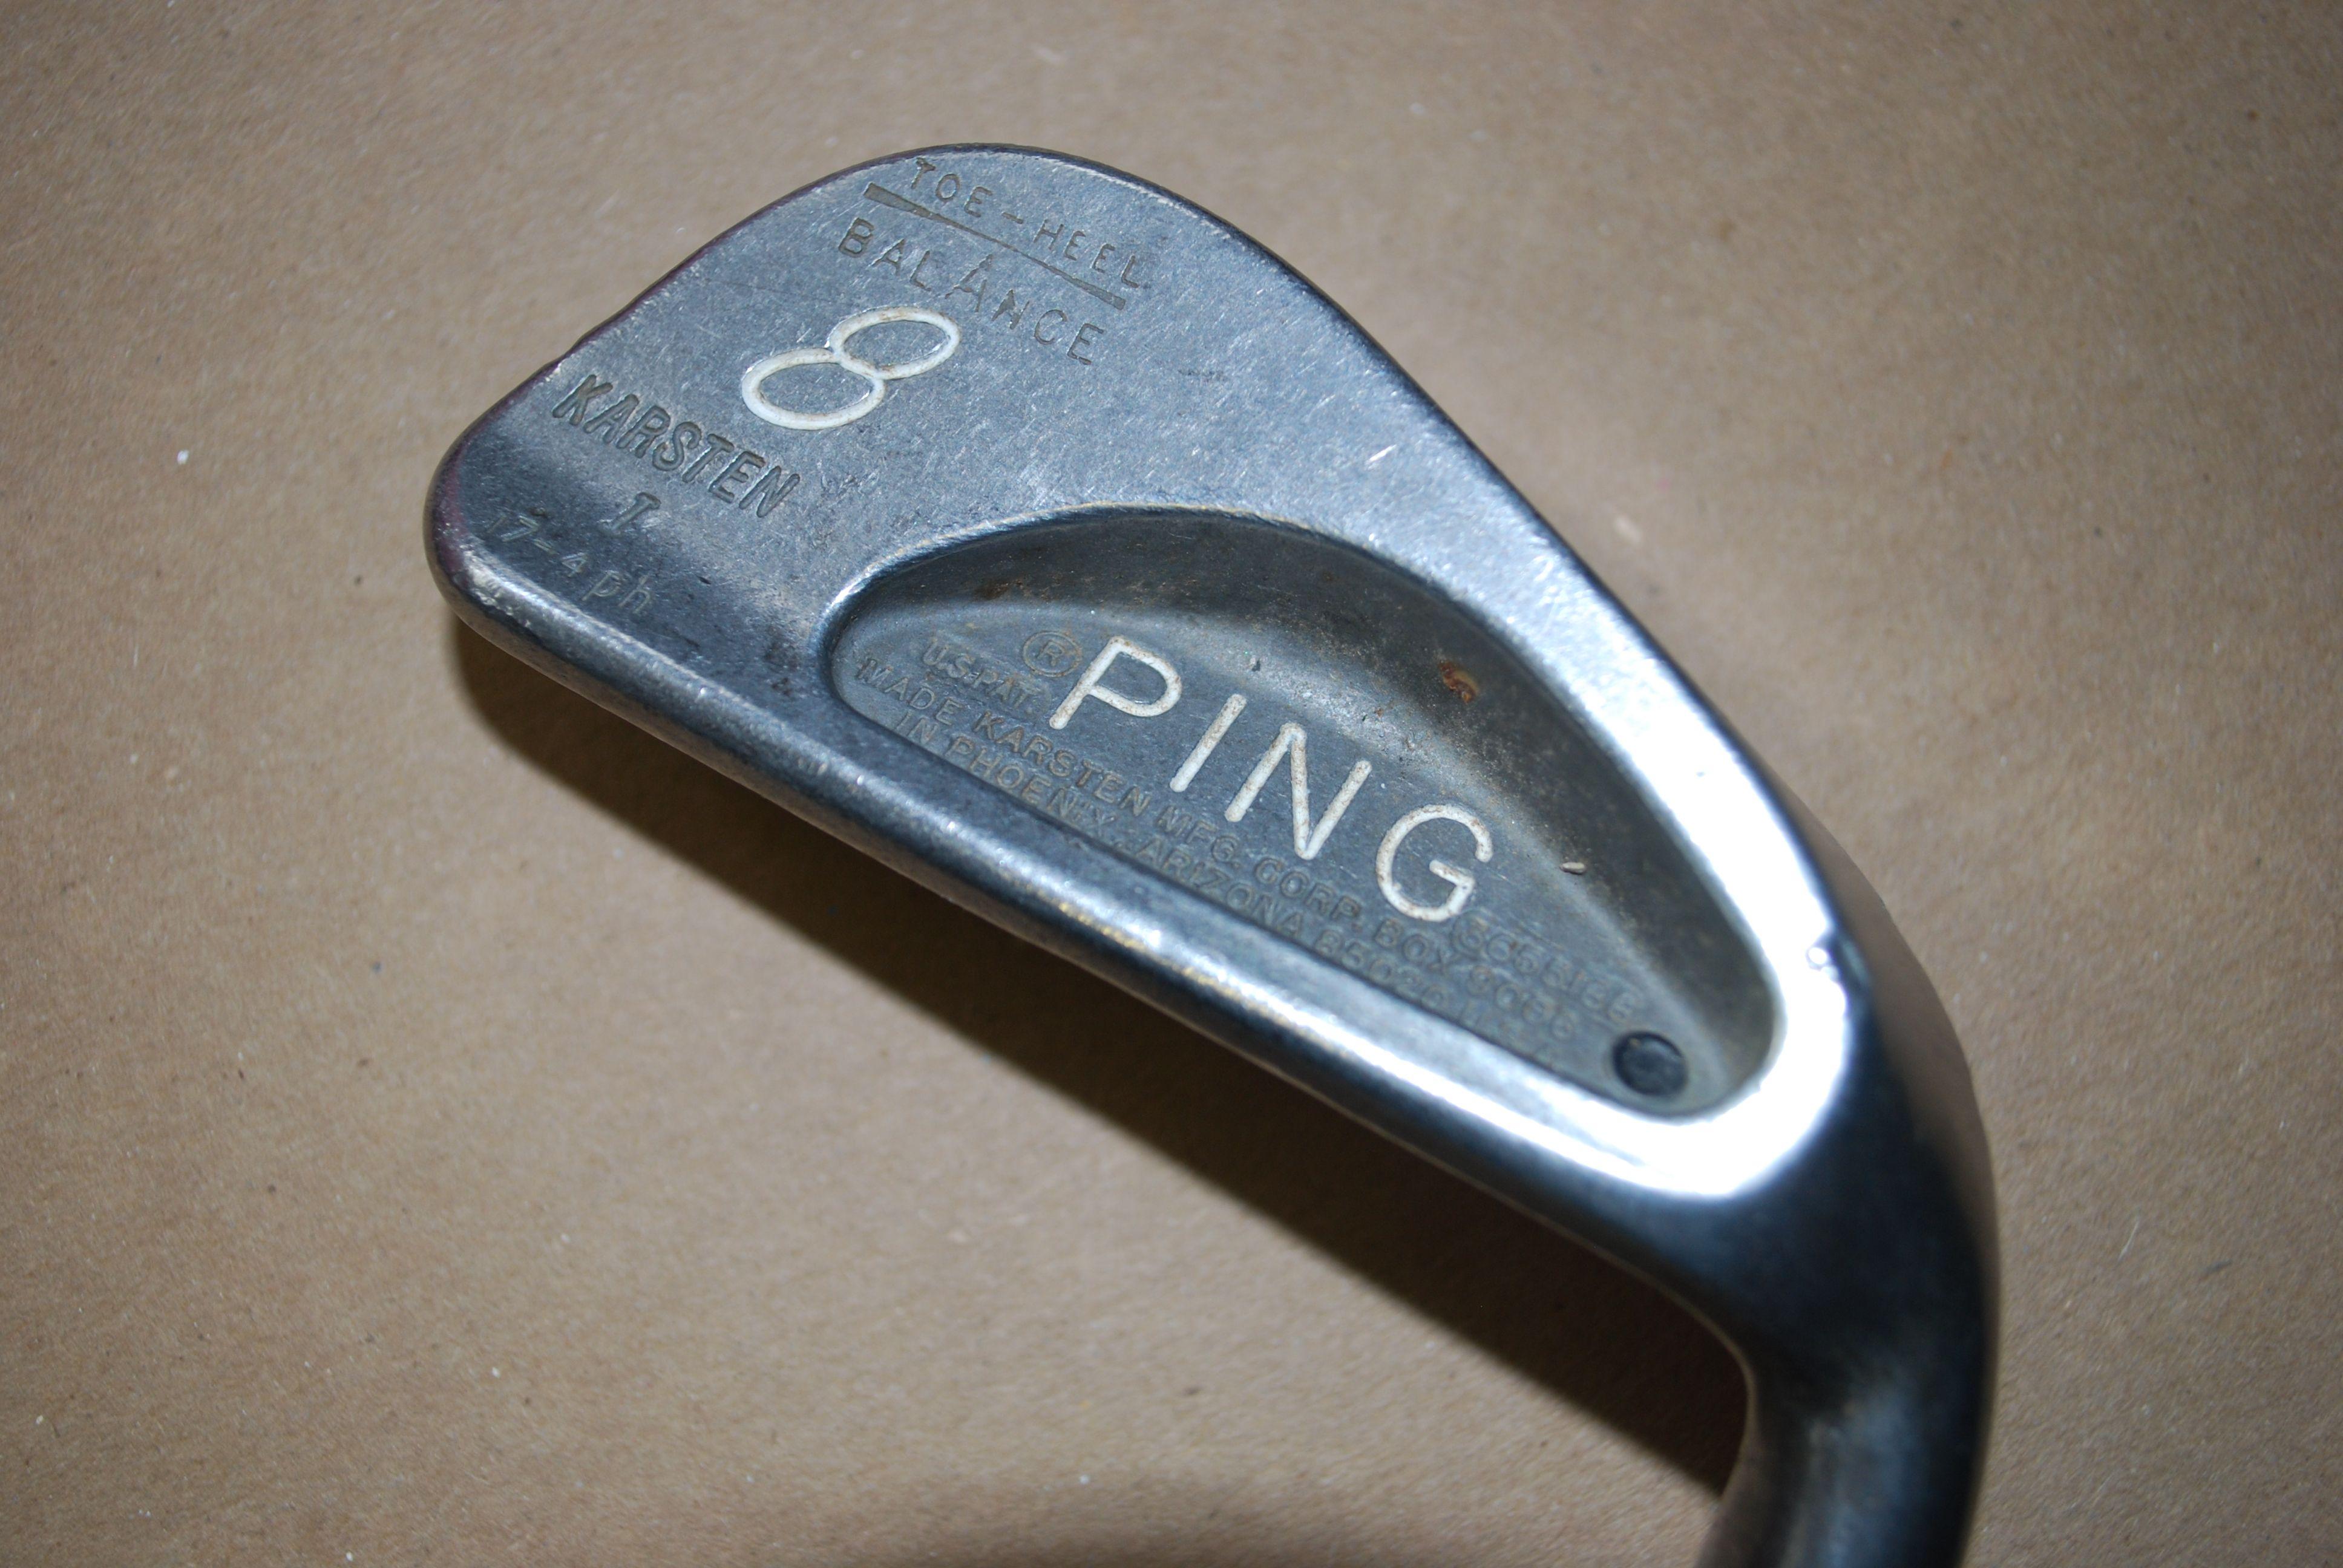 Old Ping Golf Logo - Value of old set of Pings., Grips, Shafts, Fitting